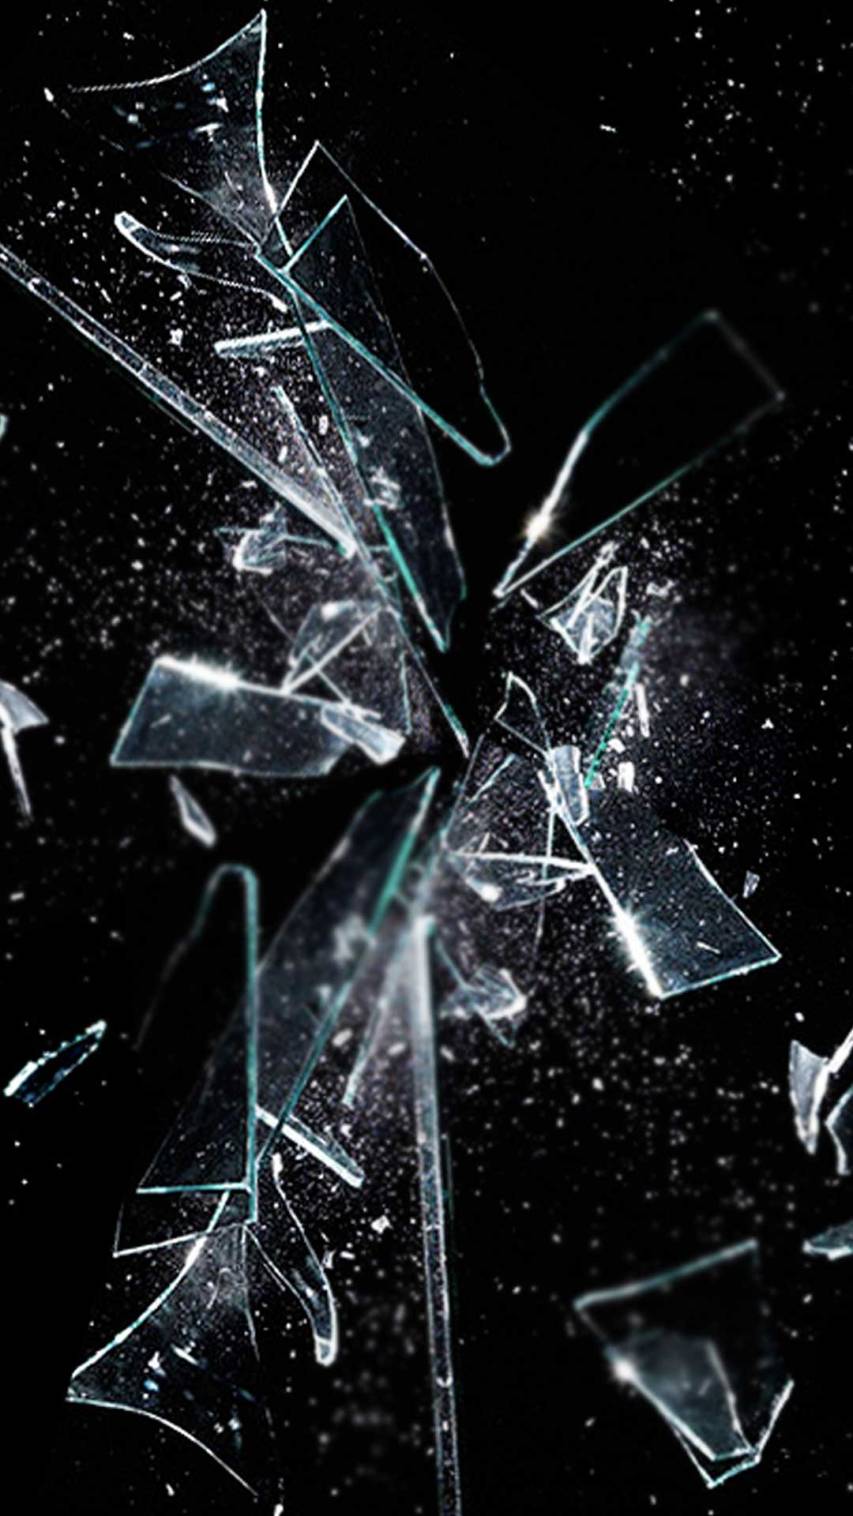 Pretty Cracked image Wallpapers free for iPhone